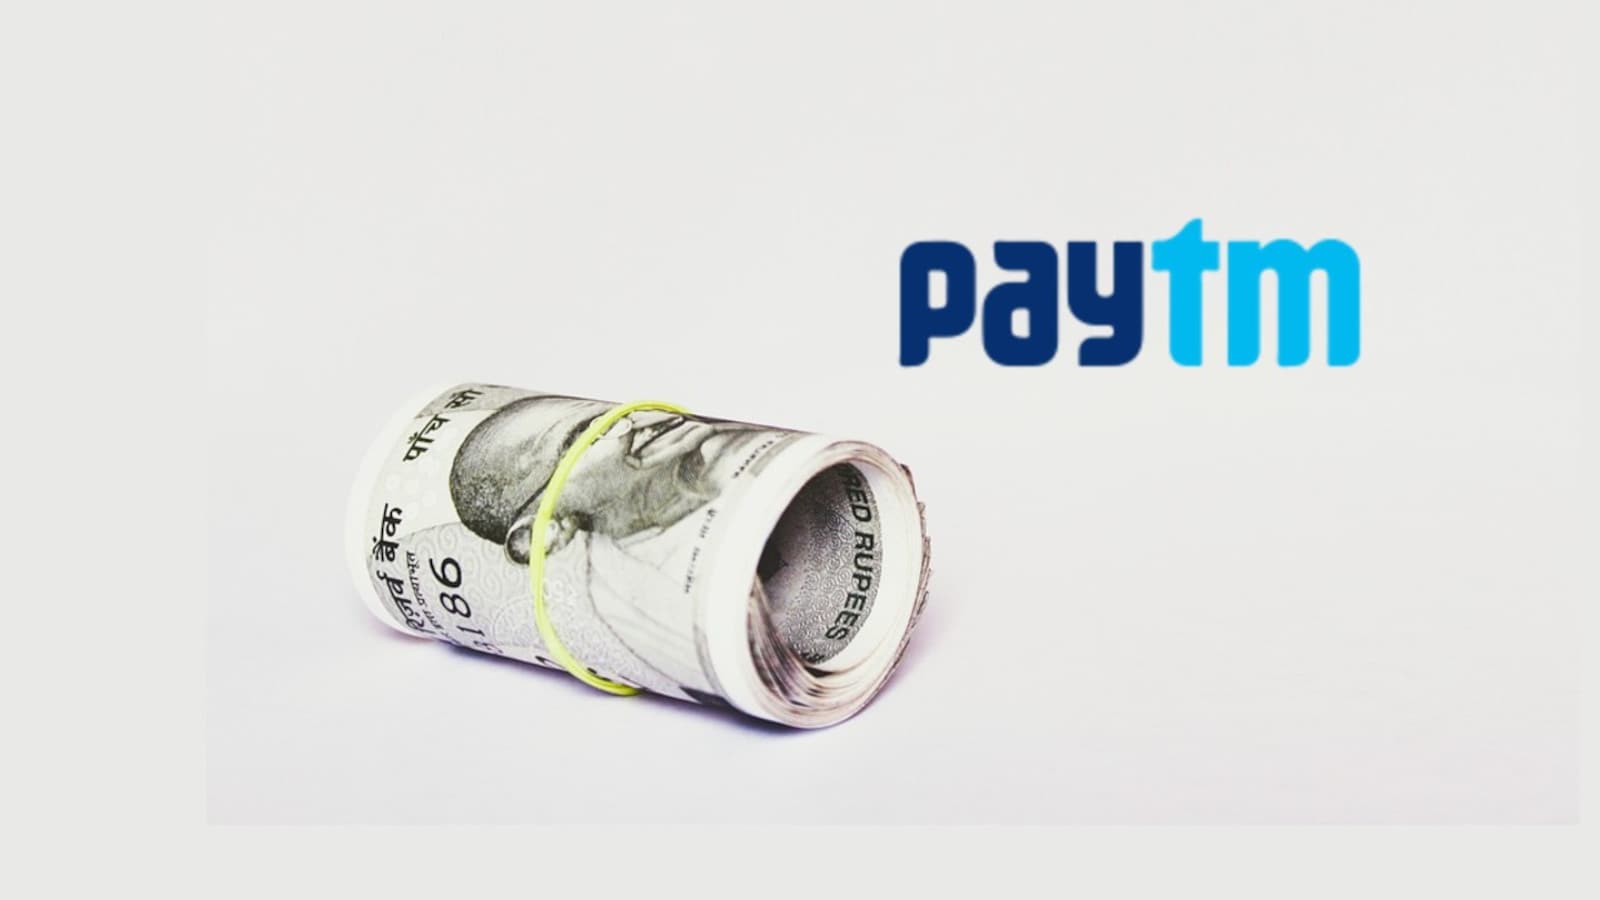 Paytm Q2 loss widens to Rs 571.5 crore, operating revenue jumps 76%